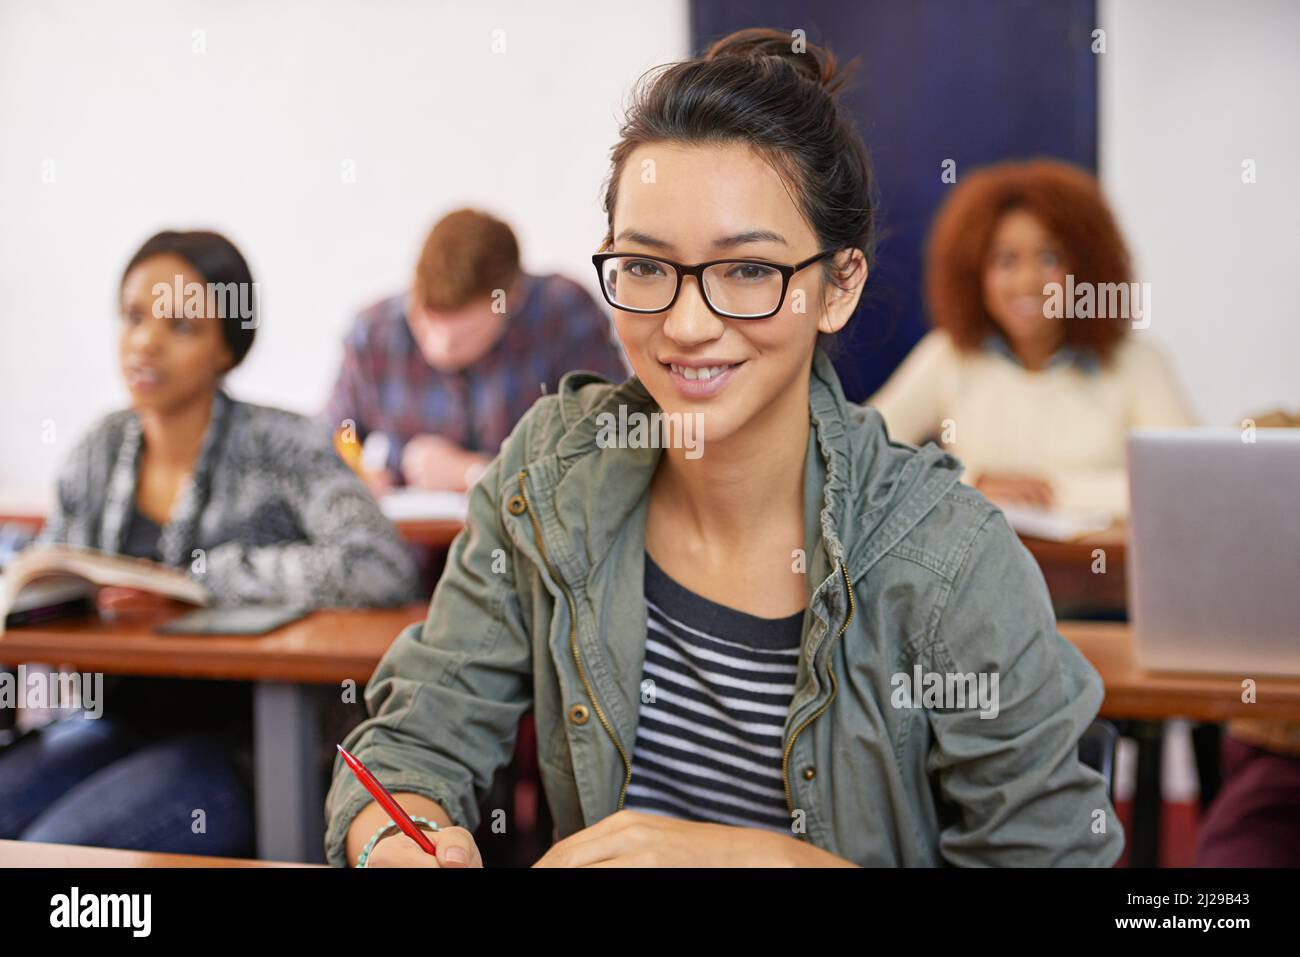 A solid education for a promising future. Portrait shot of a happy female student sitting at her desk. Stock Photo